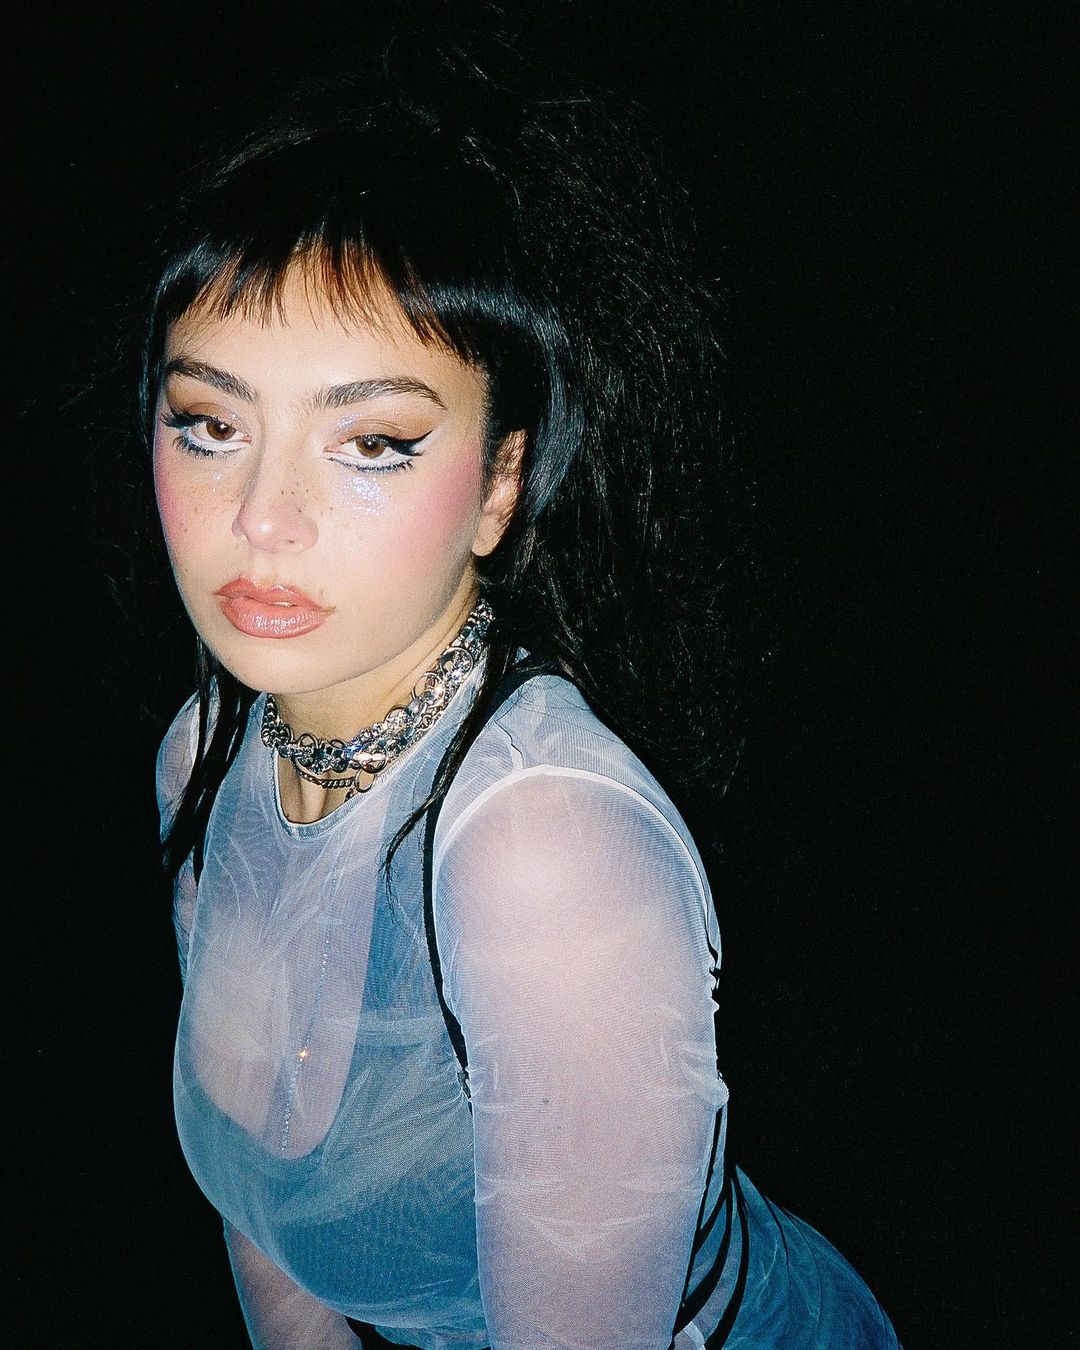 Photos n°62 : Charli XCX Looks Hot In It!